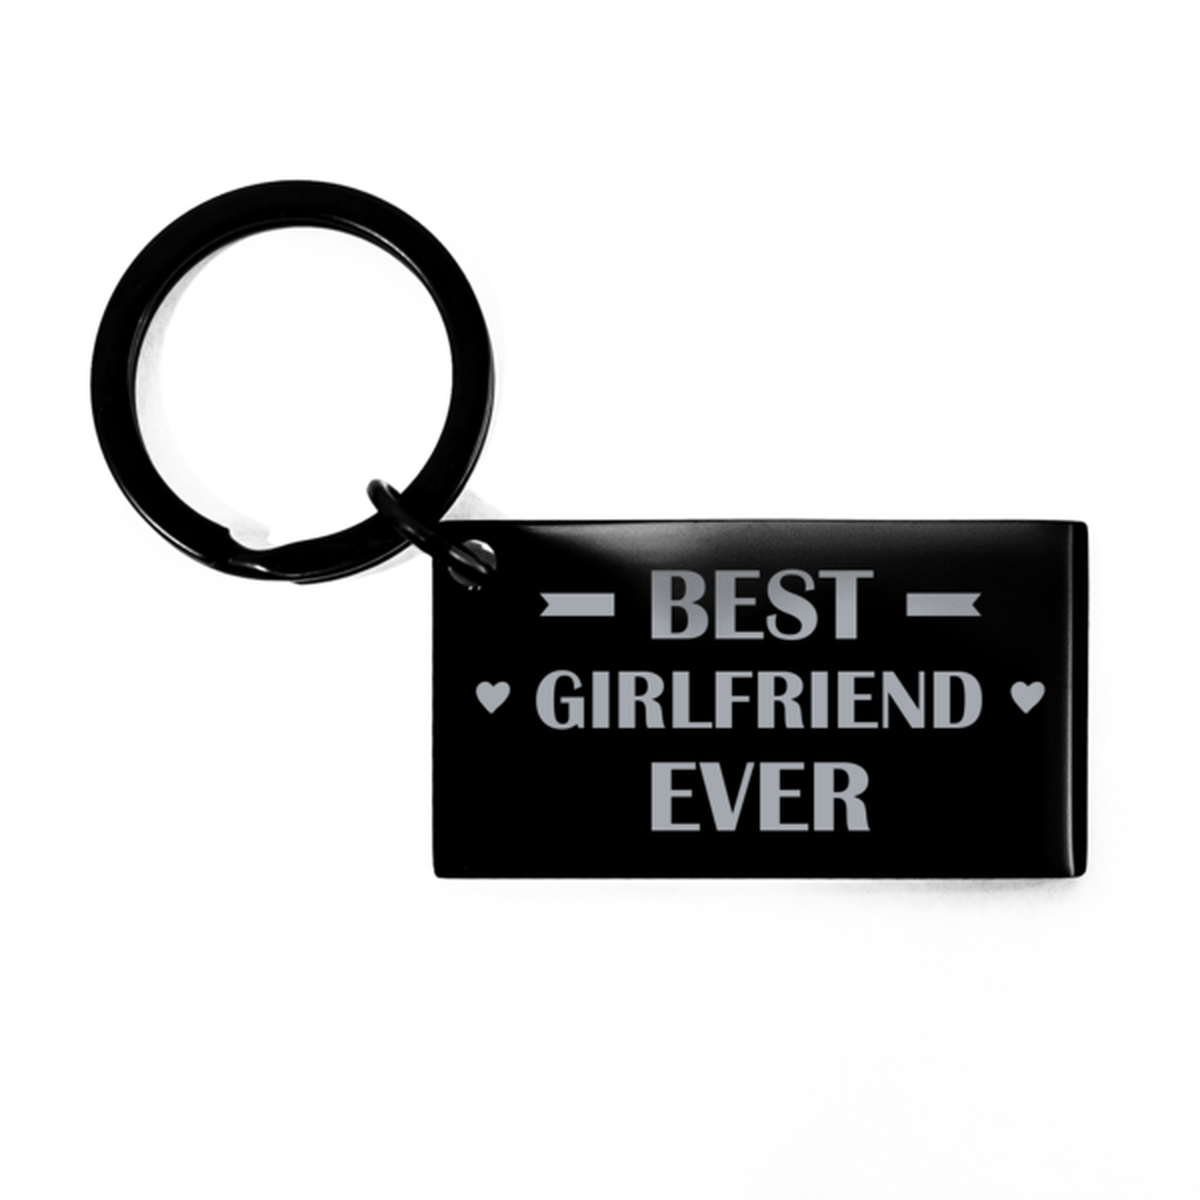 Best Girlfriend Ever Girlfriend Gifts, Funny Black Keychain For Girlfriend, Birthday Engraved Keyring Presents For Women